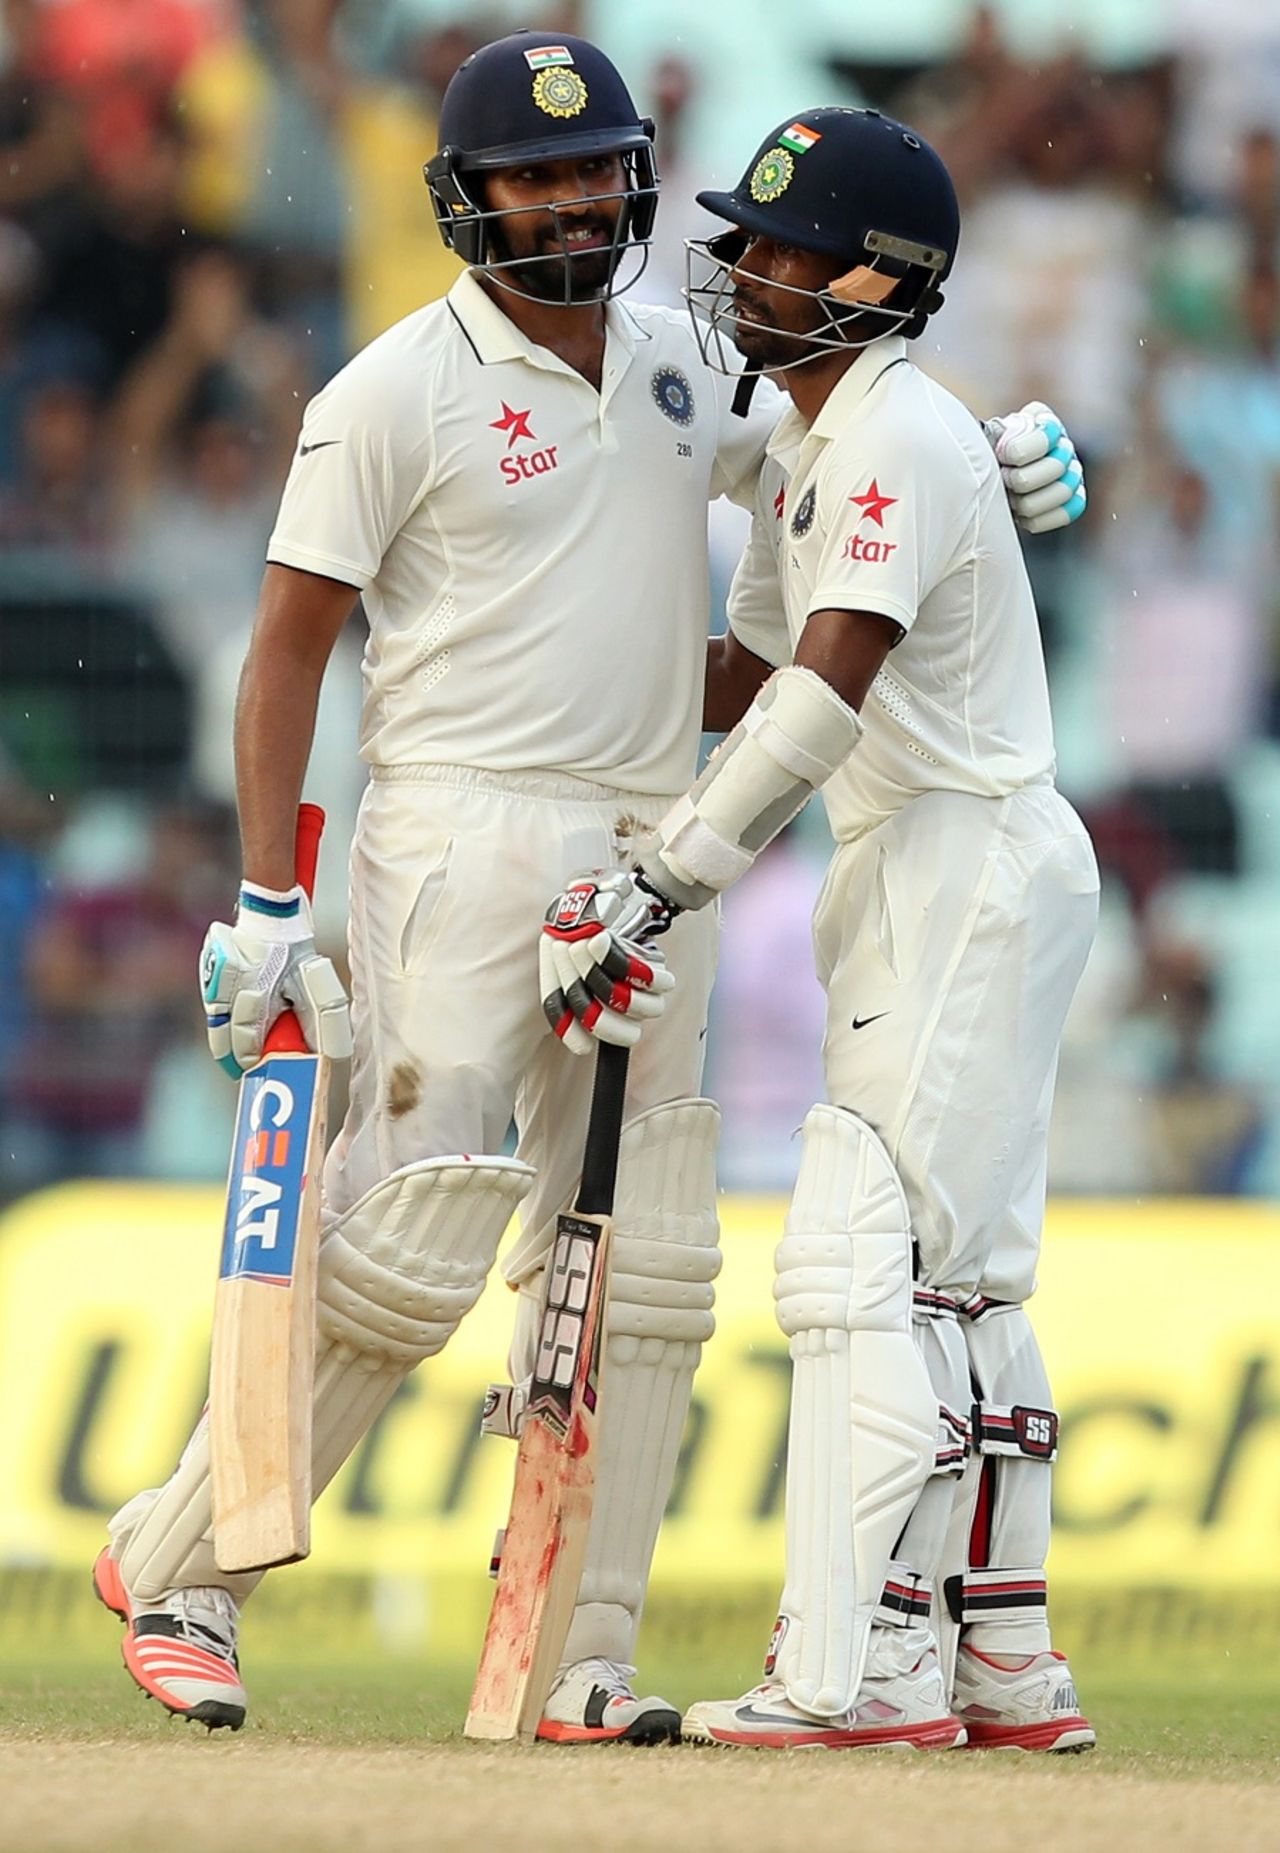 Rohit Sharma and Wriddhiman Saha added a century stand for the seventh wicket, India v New Zealand, 2nd Test, Kolkata, 3rd day, October 2, 2016